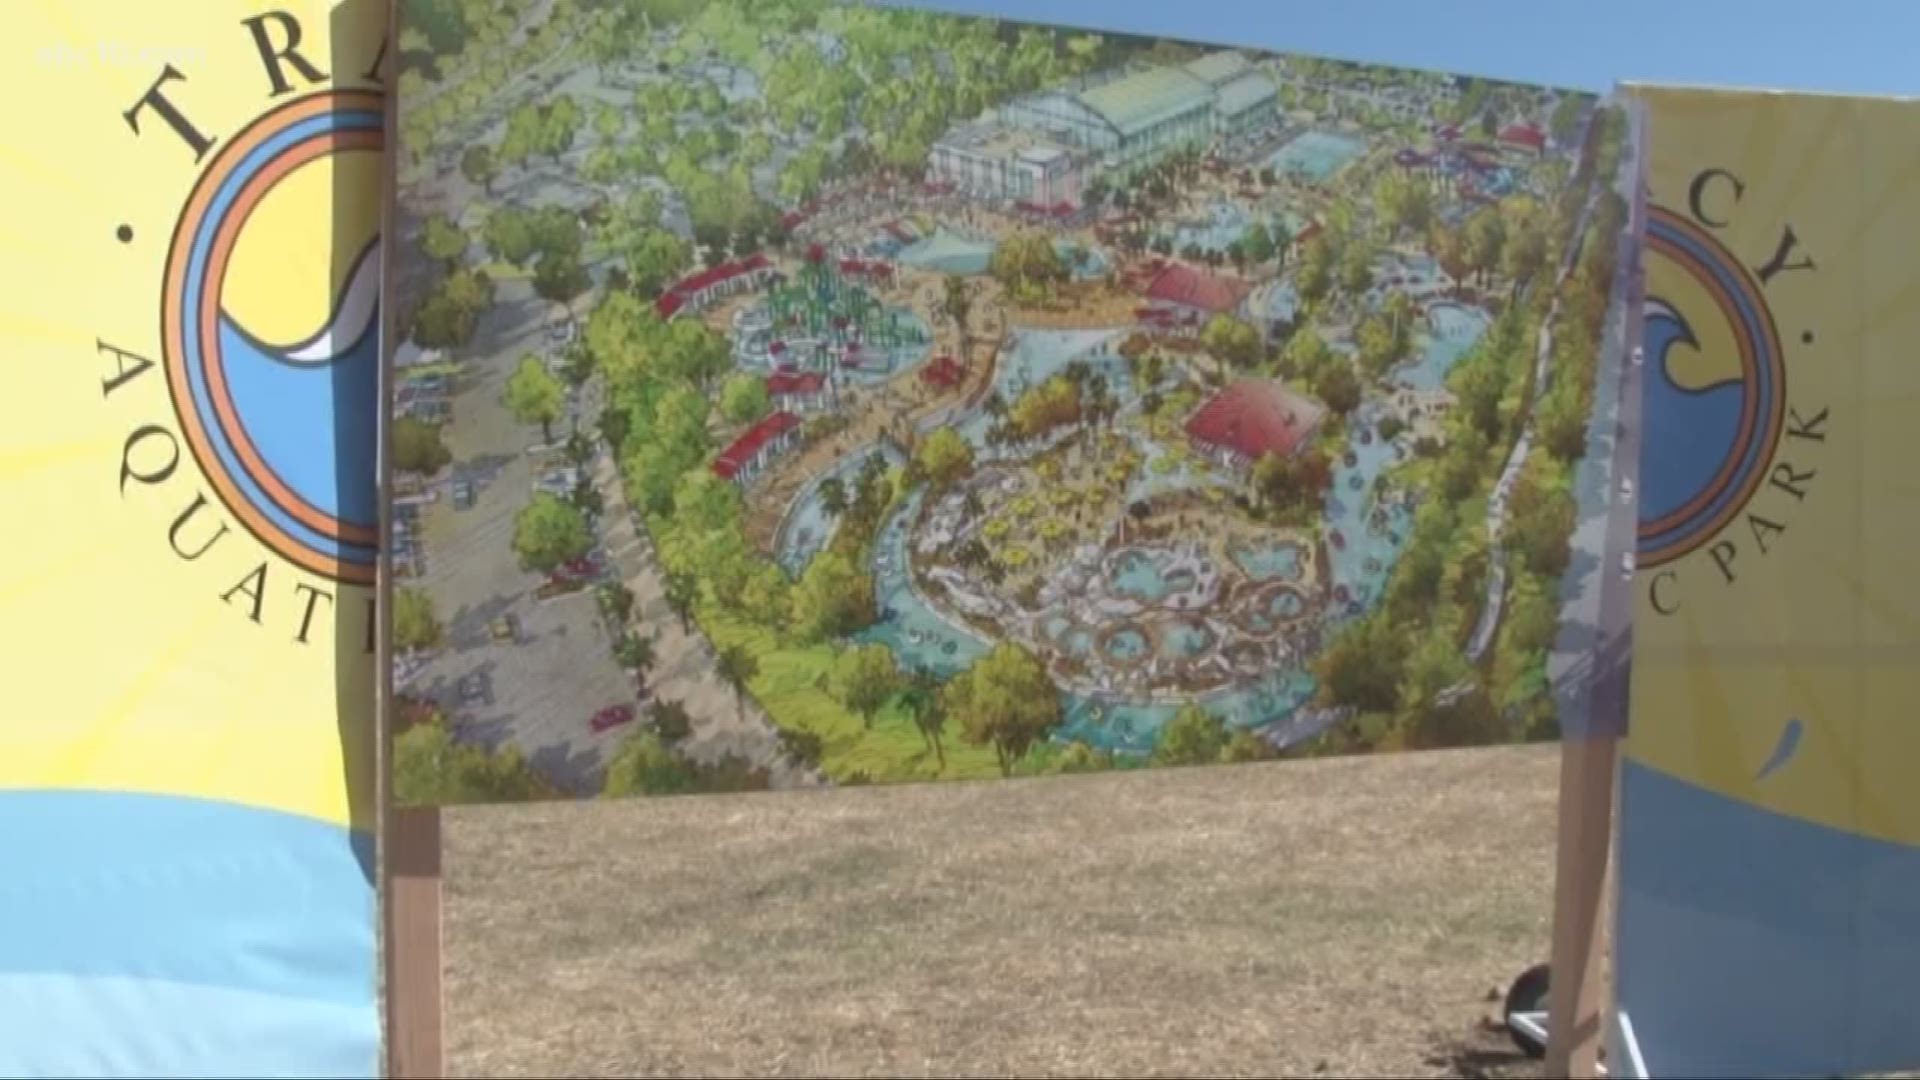 A year-round water park is coming to Tracy in 2021.